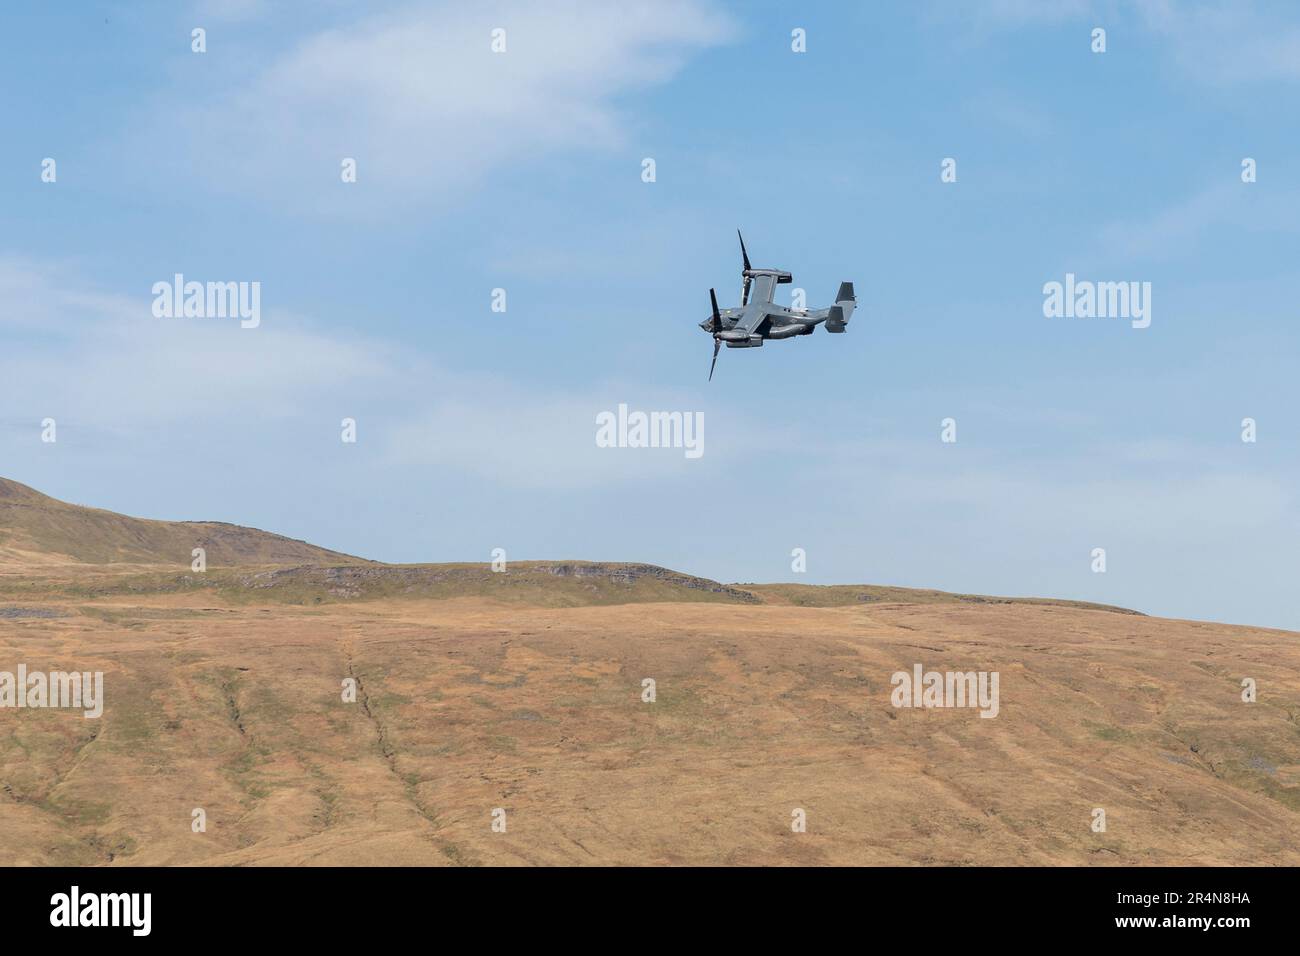 v22 osprey tiltrotor military aircraft low flying in the yorkshire dales Stock Photo